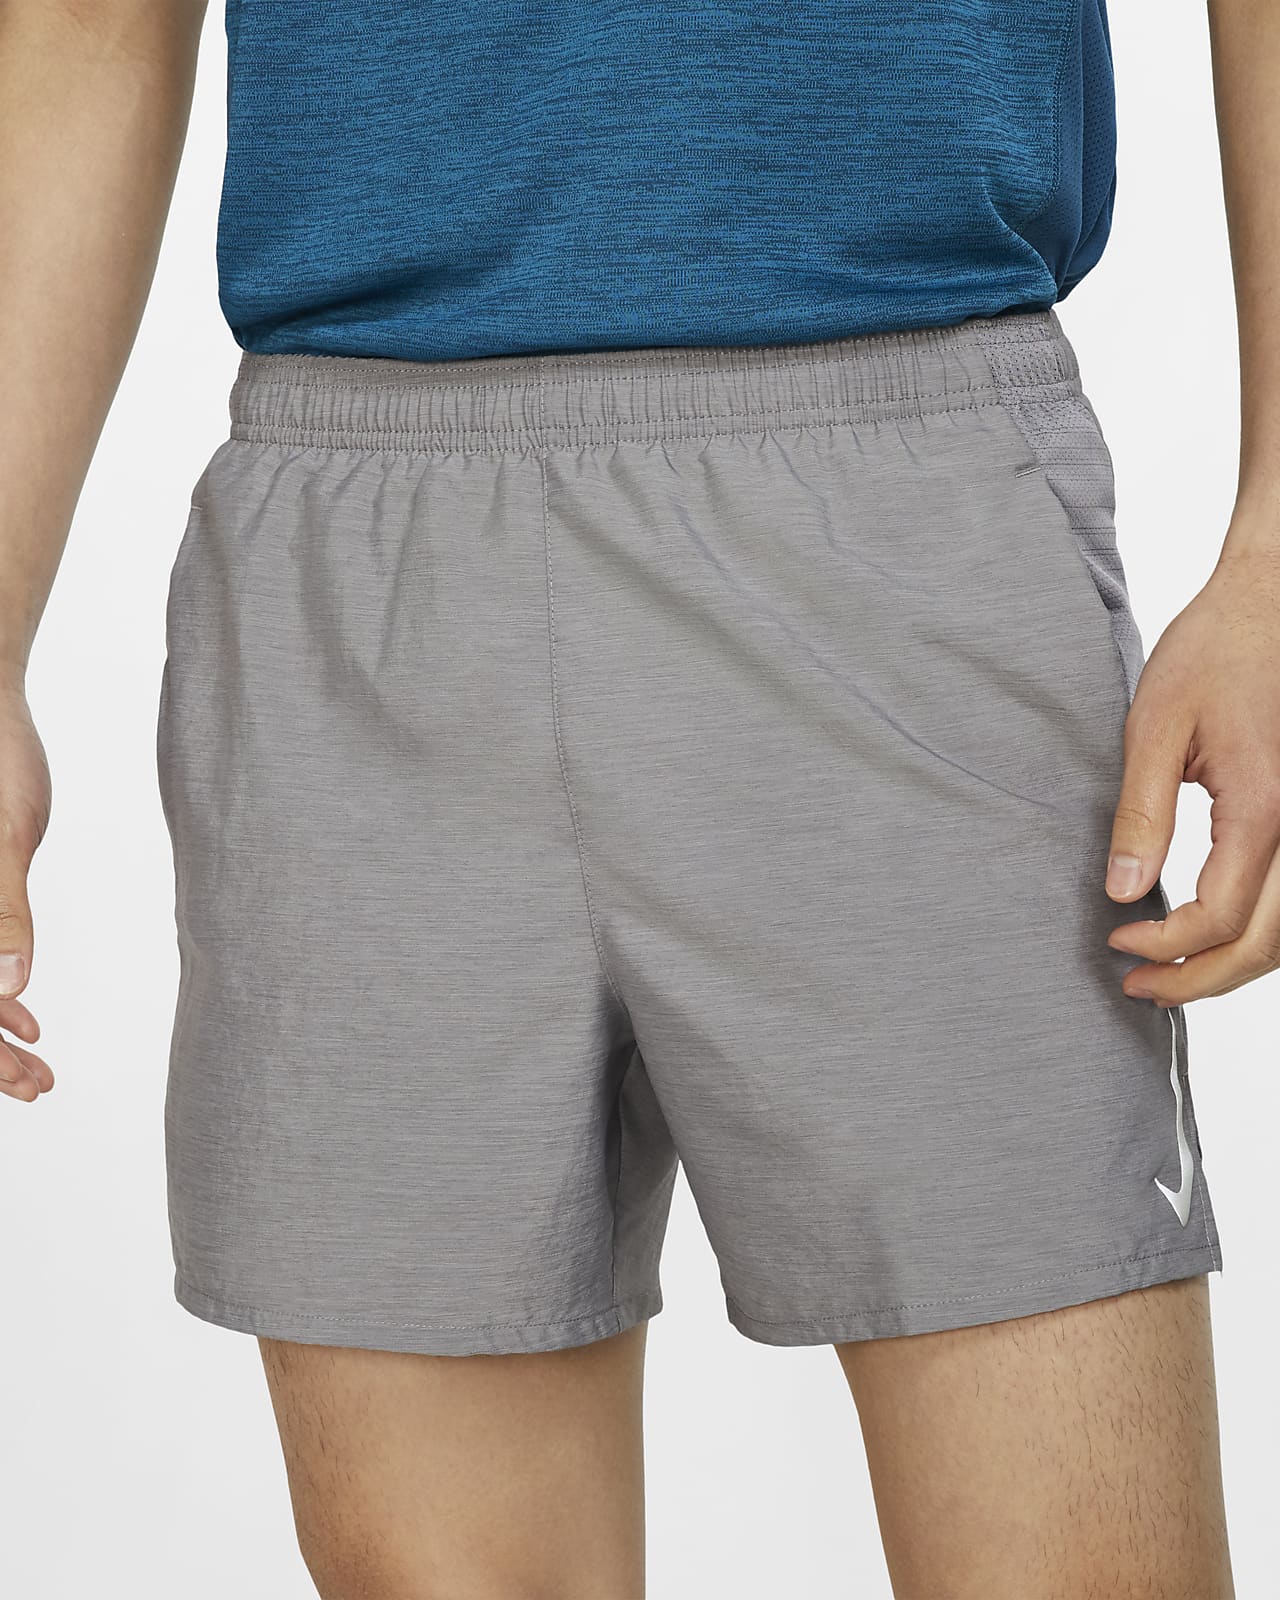 nike 7 inch challenger shorts